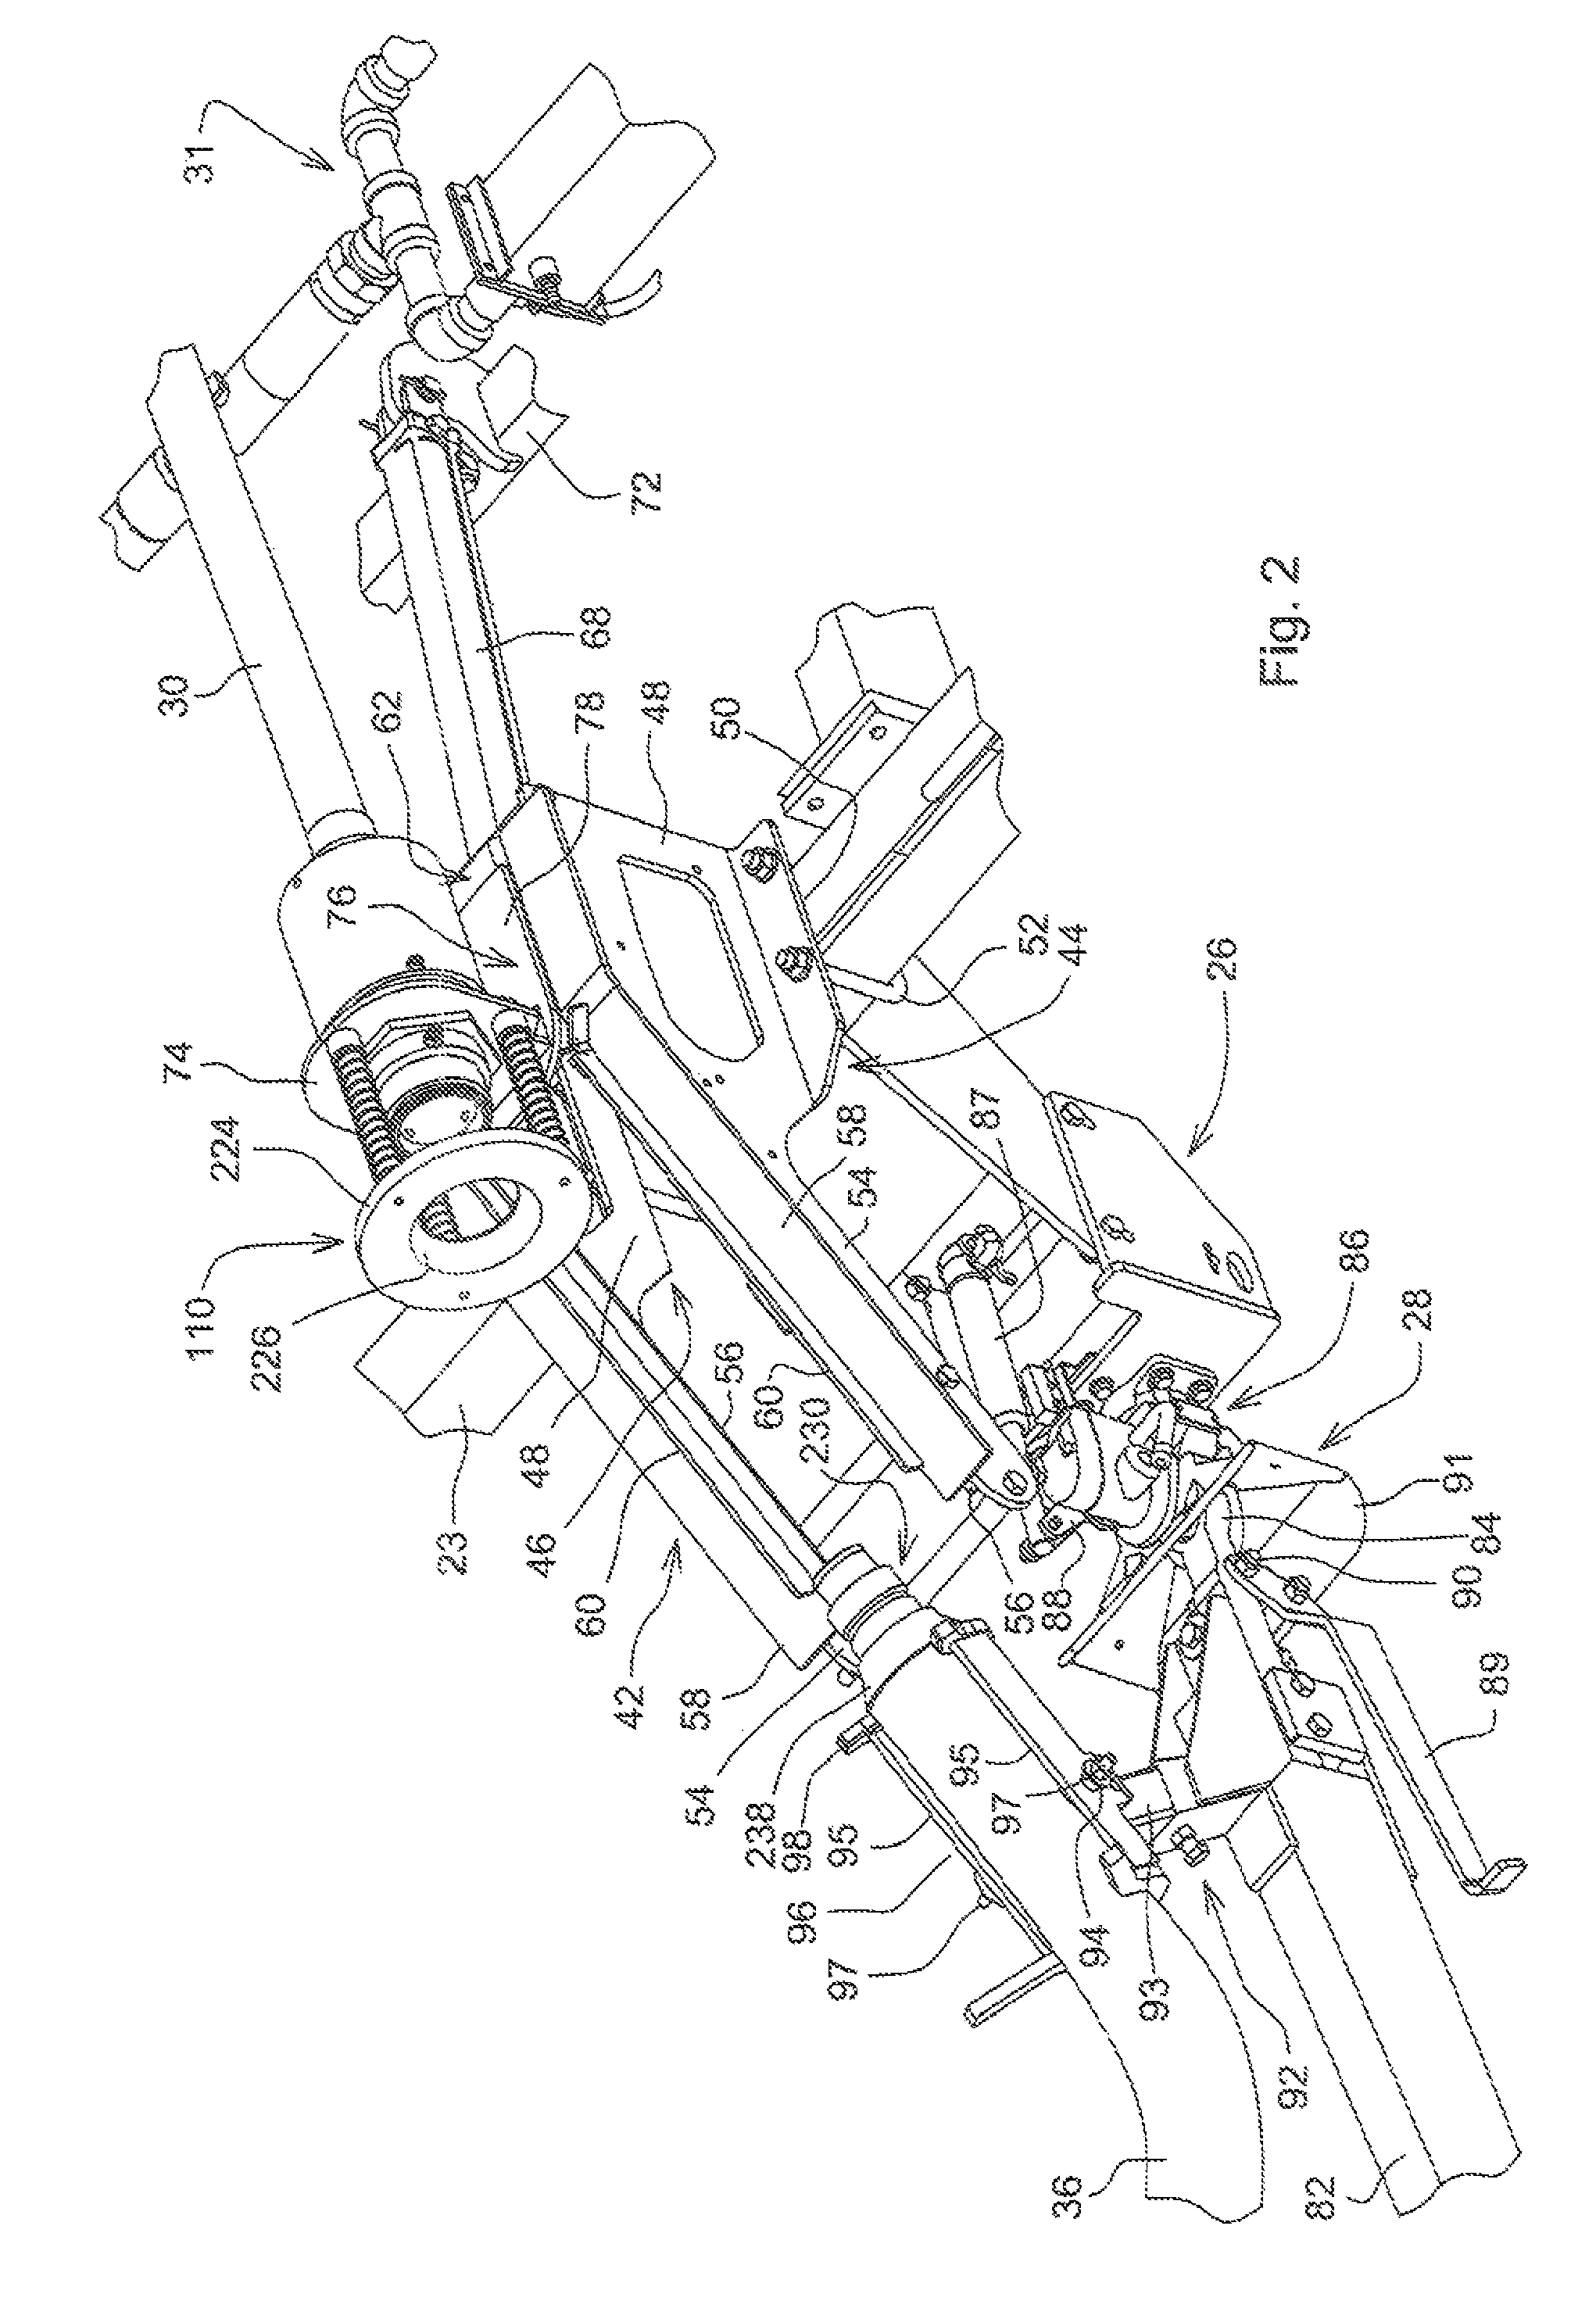 Hitch and coupling arrangement for automatically effecting towing hitch and fluid quick-coupler connections between a nurse tank wagon and an NH3 applicator implement